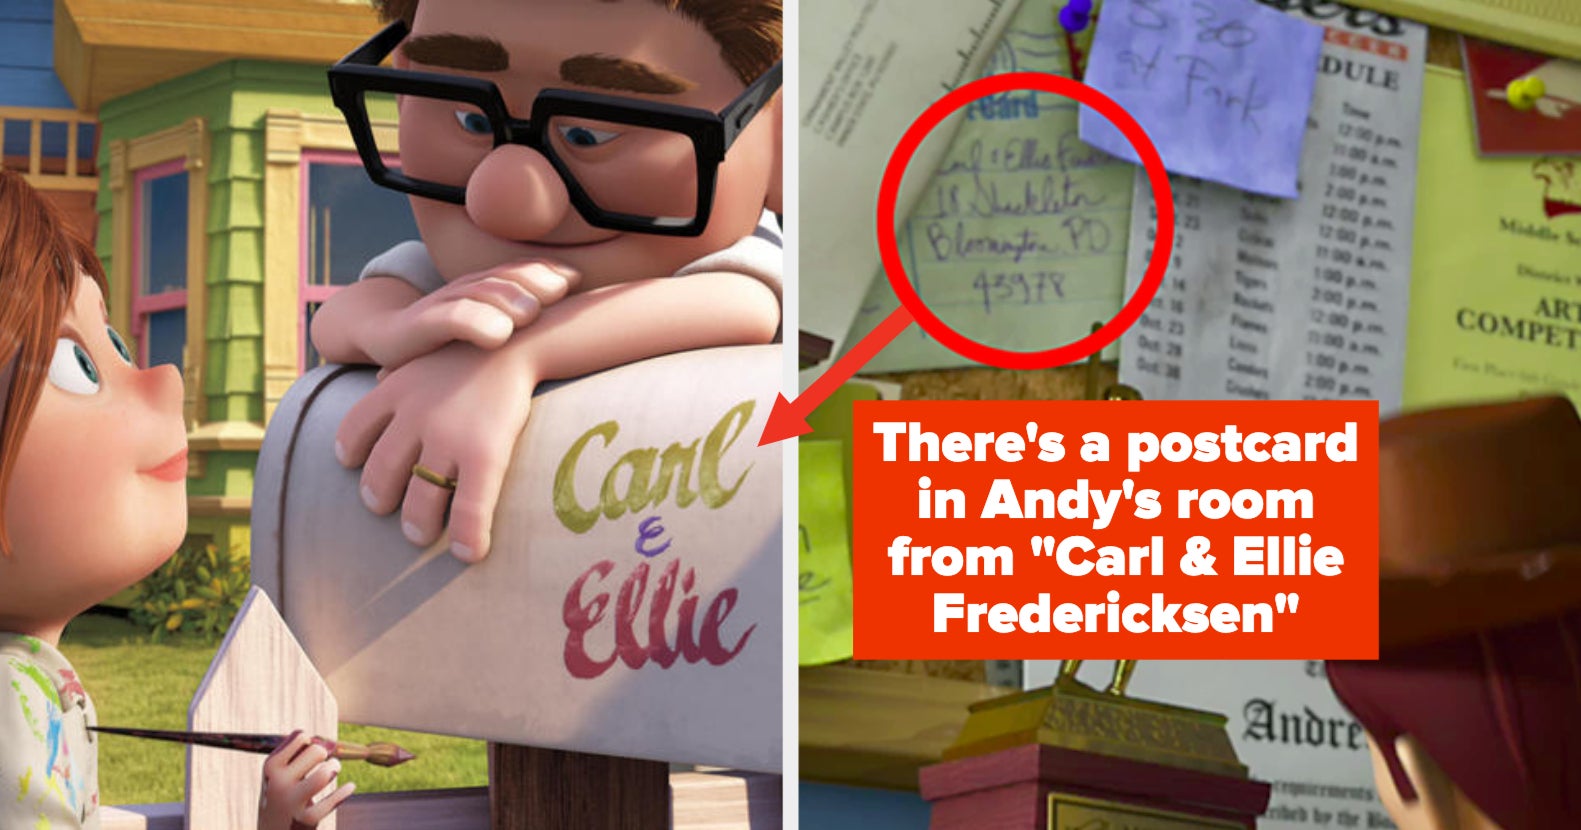 51 Details In Pixar Movies That Confirm The Pixar Theory